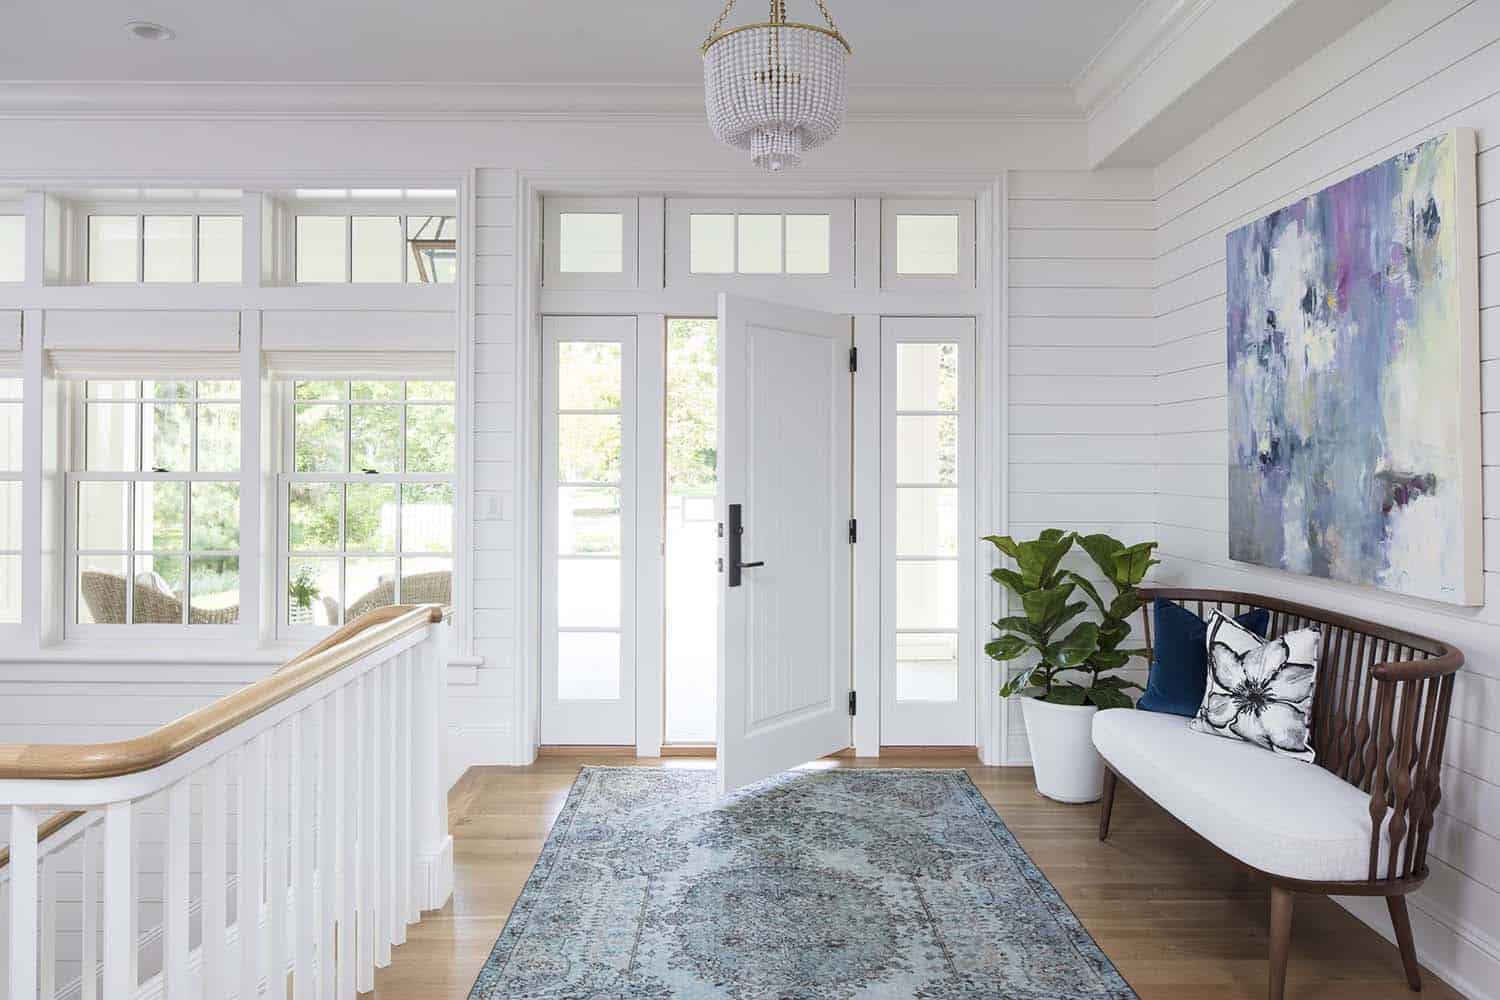 How Big Should An Entryway Rug Be